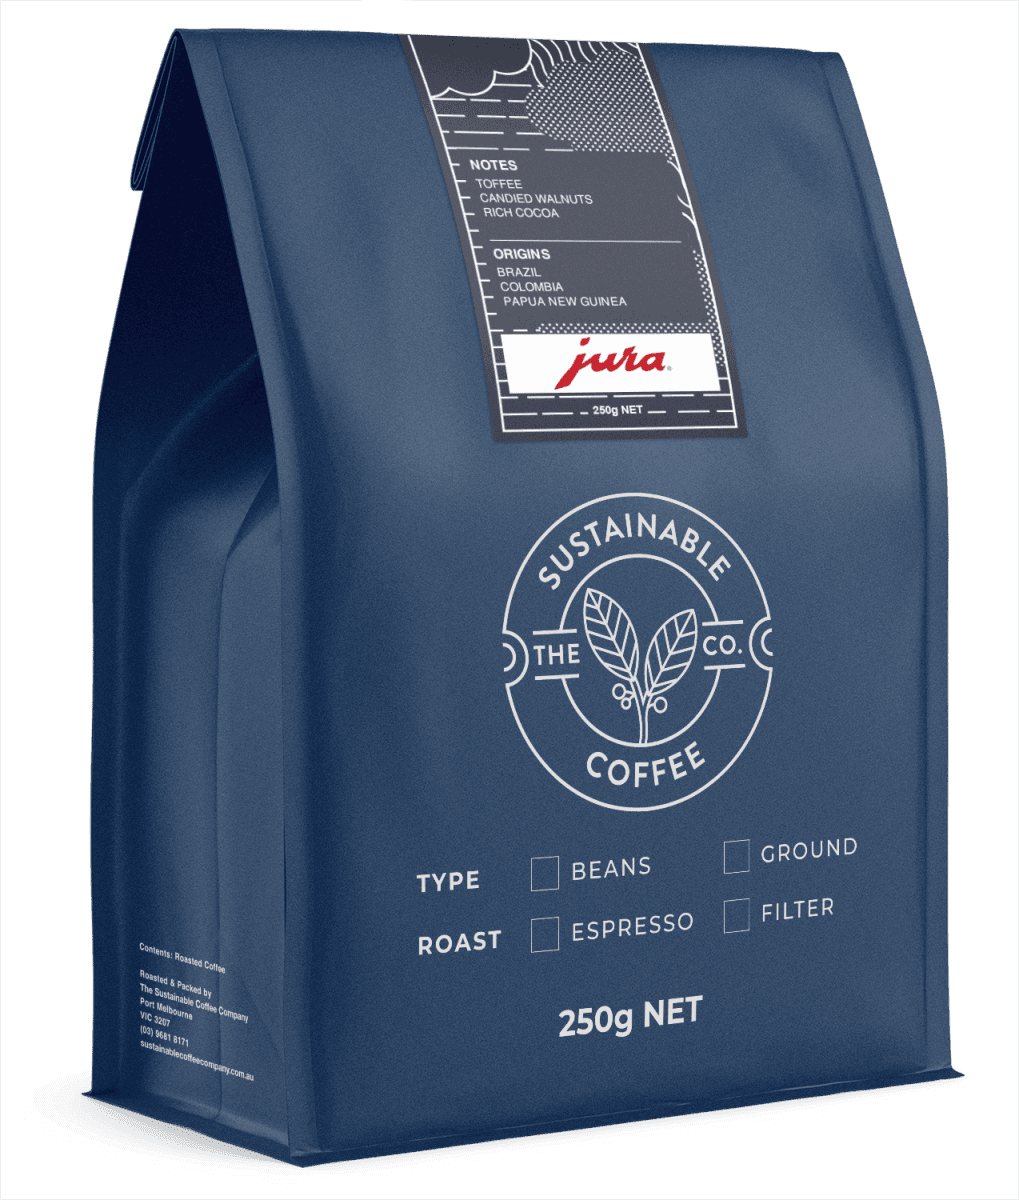 Product Jura – The Sustainable Coffee Company image